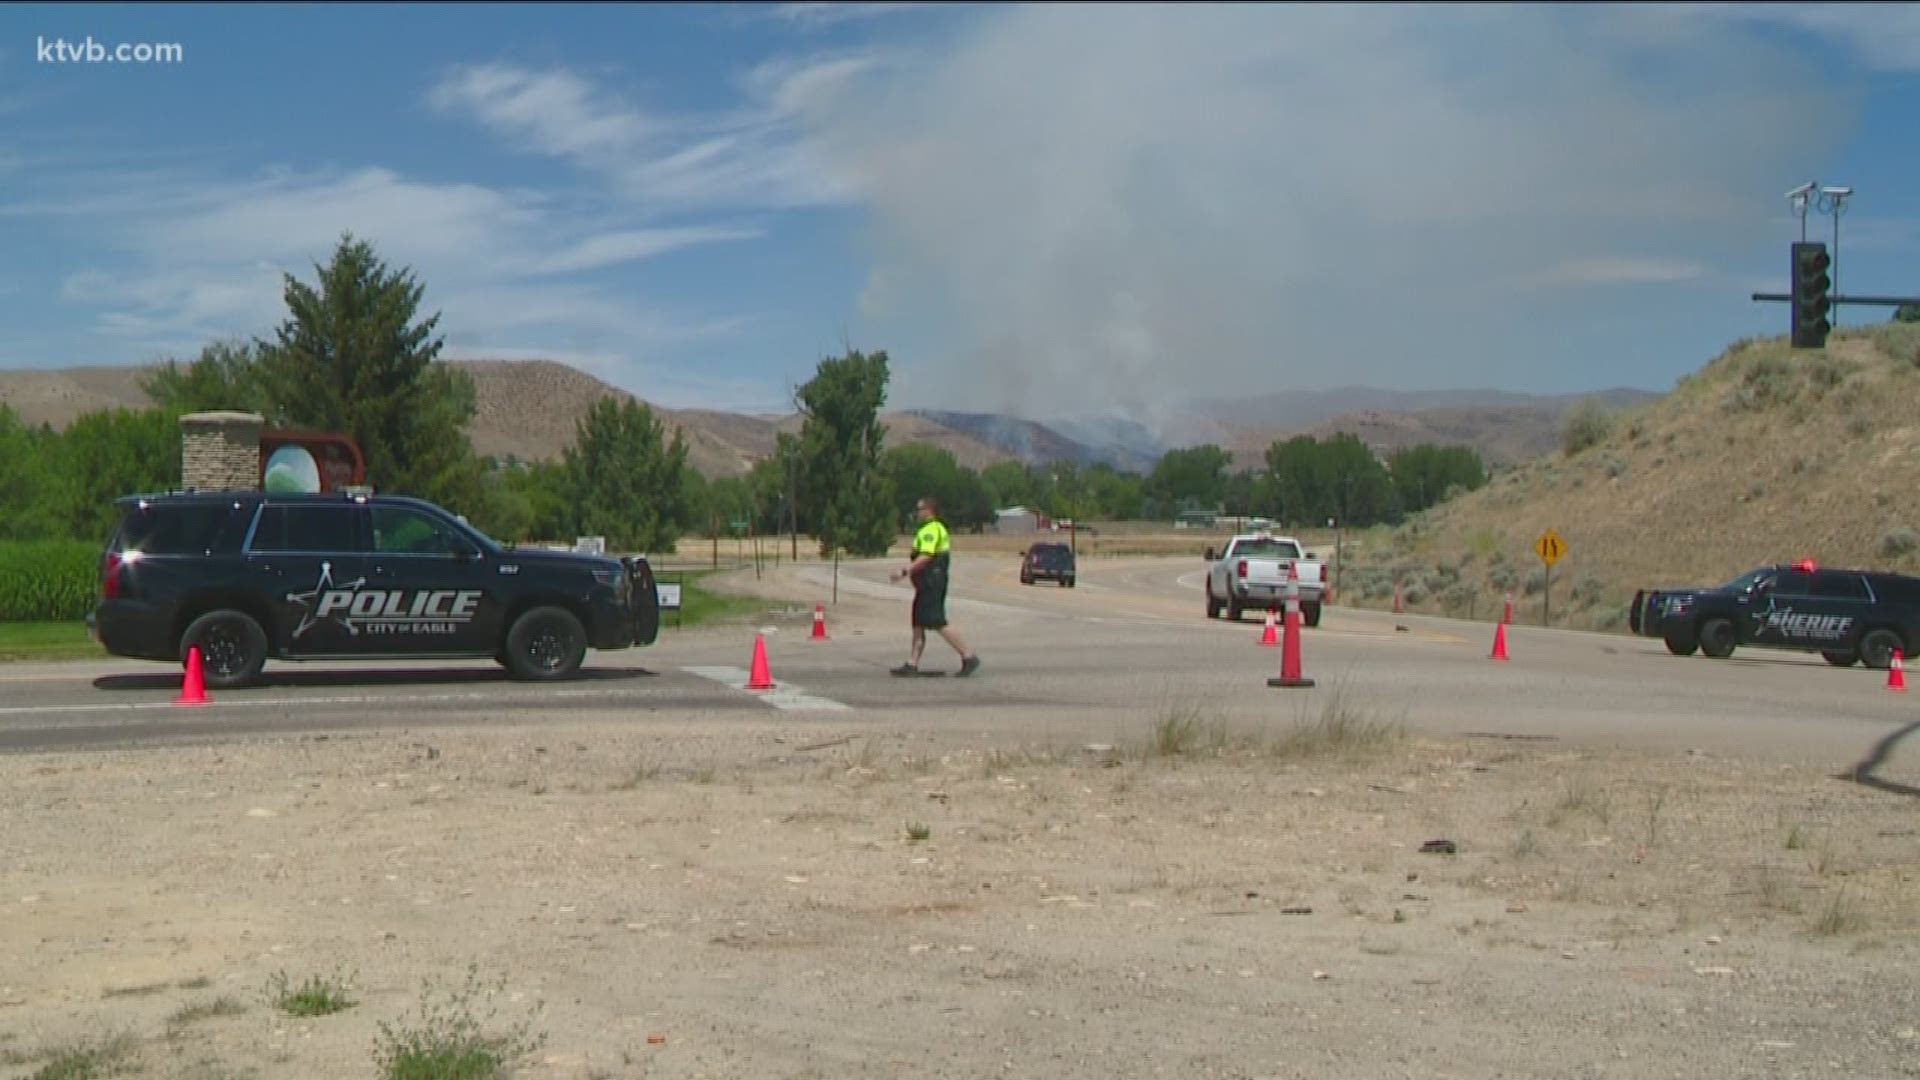 Idaho 55 was shut down north of Eagle after a fire broke out near the Avimor subdivision Sunday afternoon.